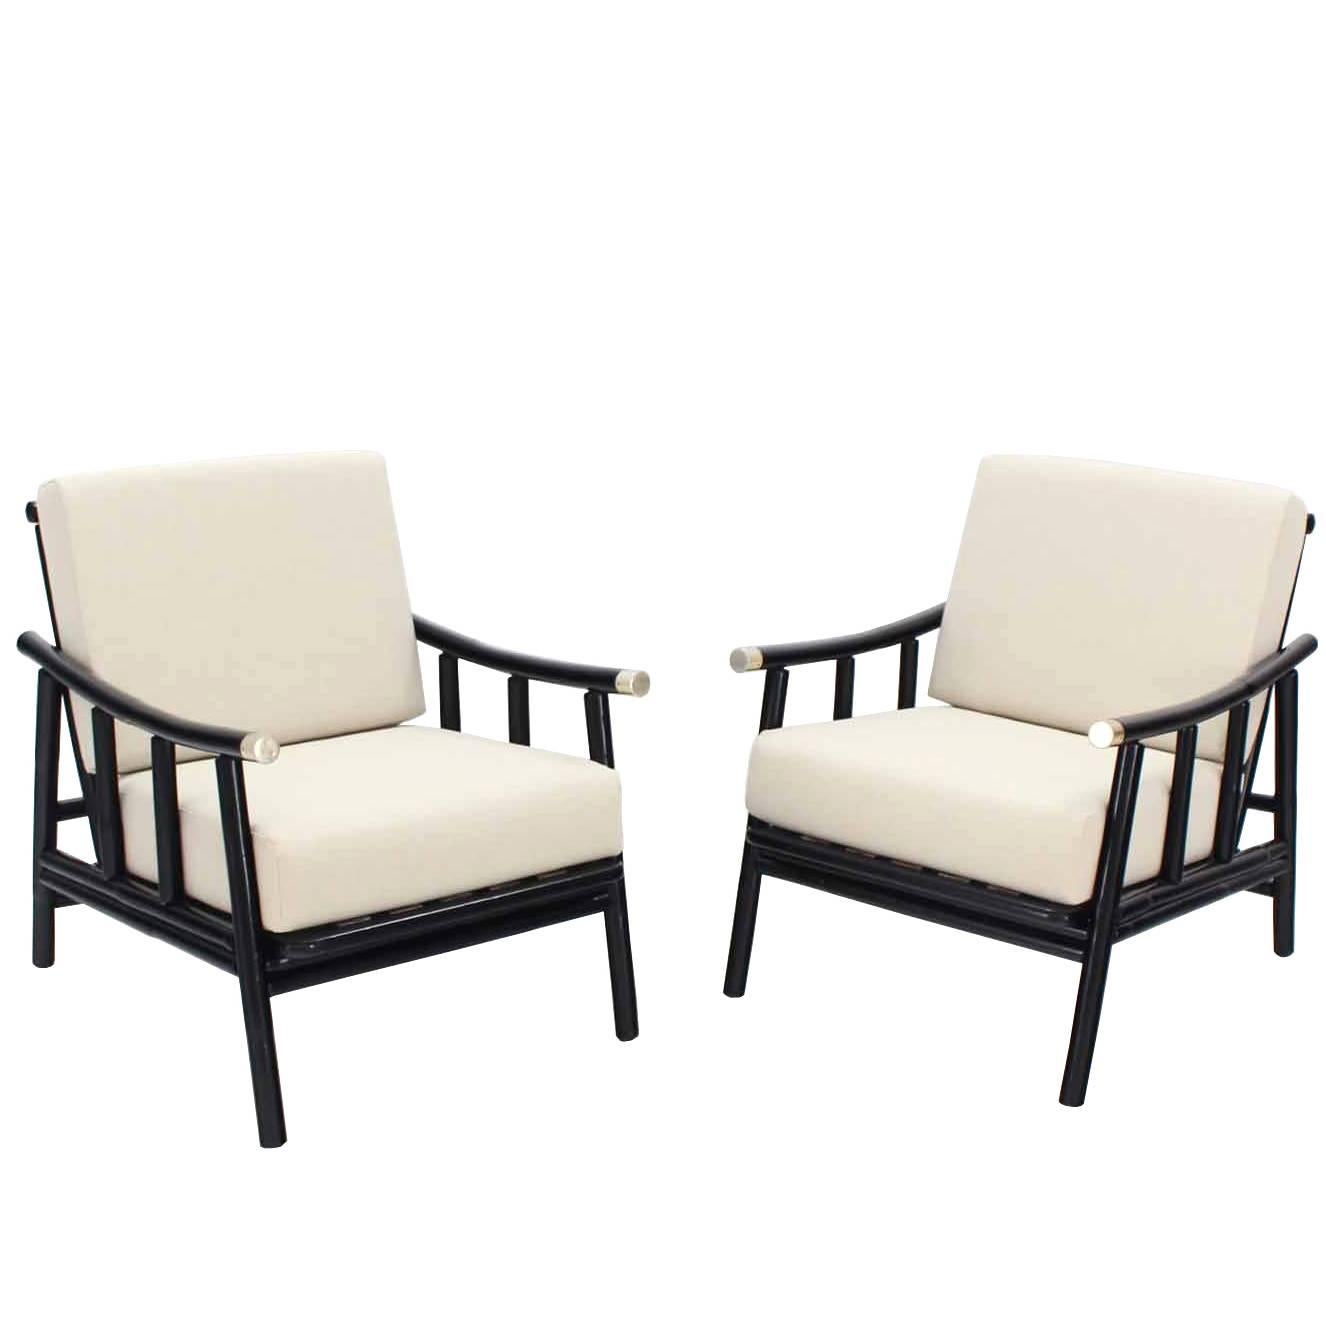 Pair of Faux Bamboo Lounge Chairs New Upholstery For Sale